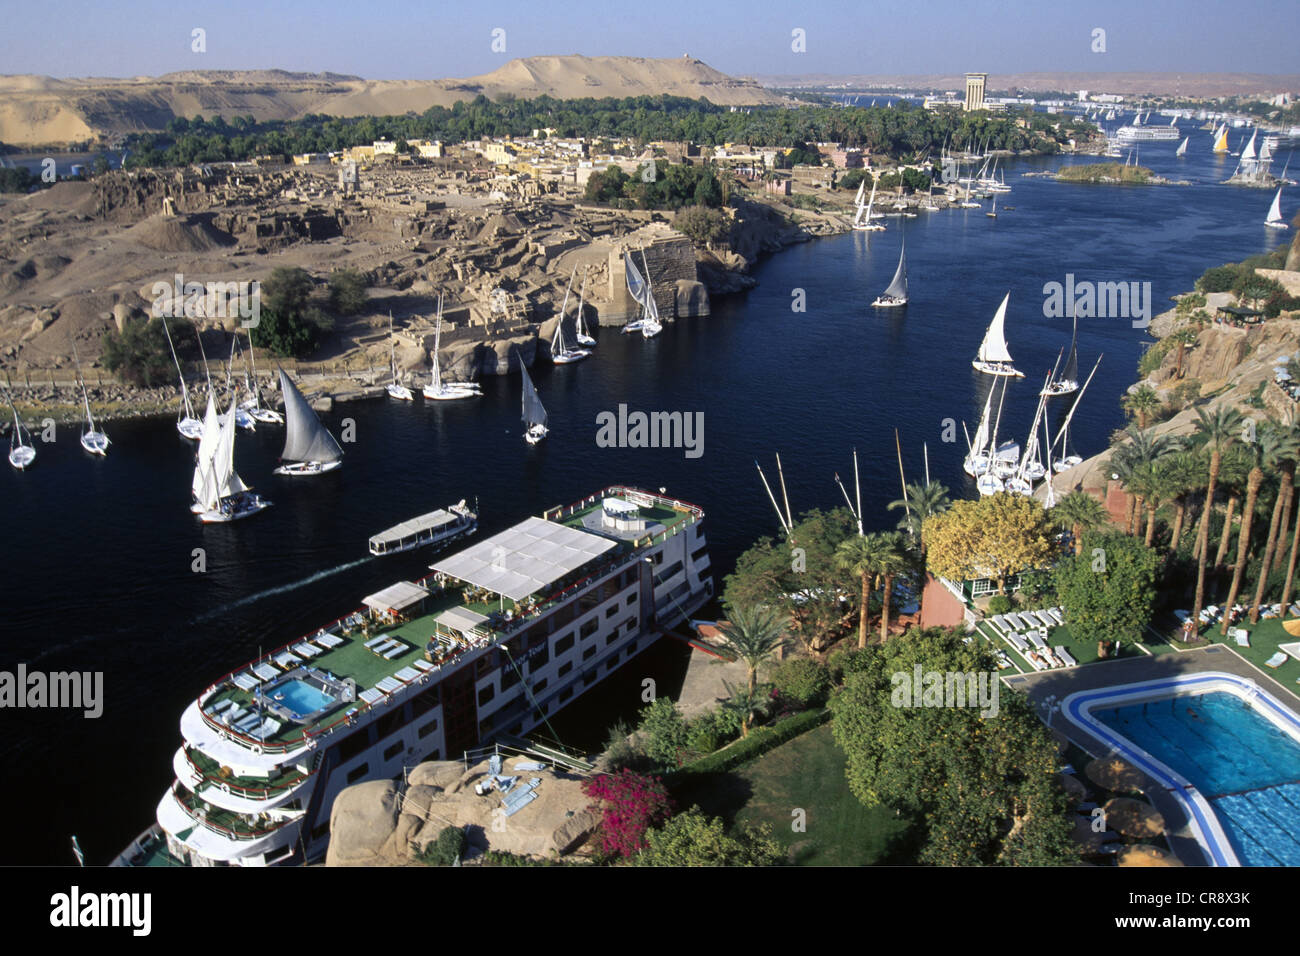 Old Cataract Hotel, view towards the Nile, sailboats and a cruise ship, Assuan, Egypt Stock Photo